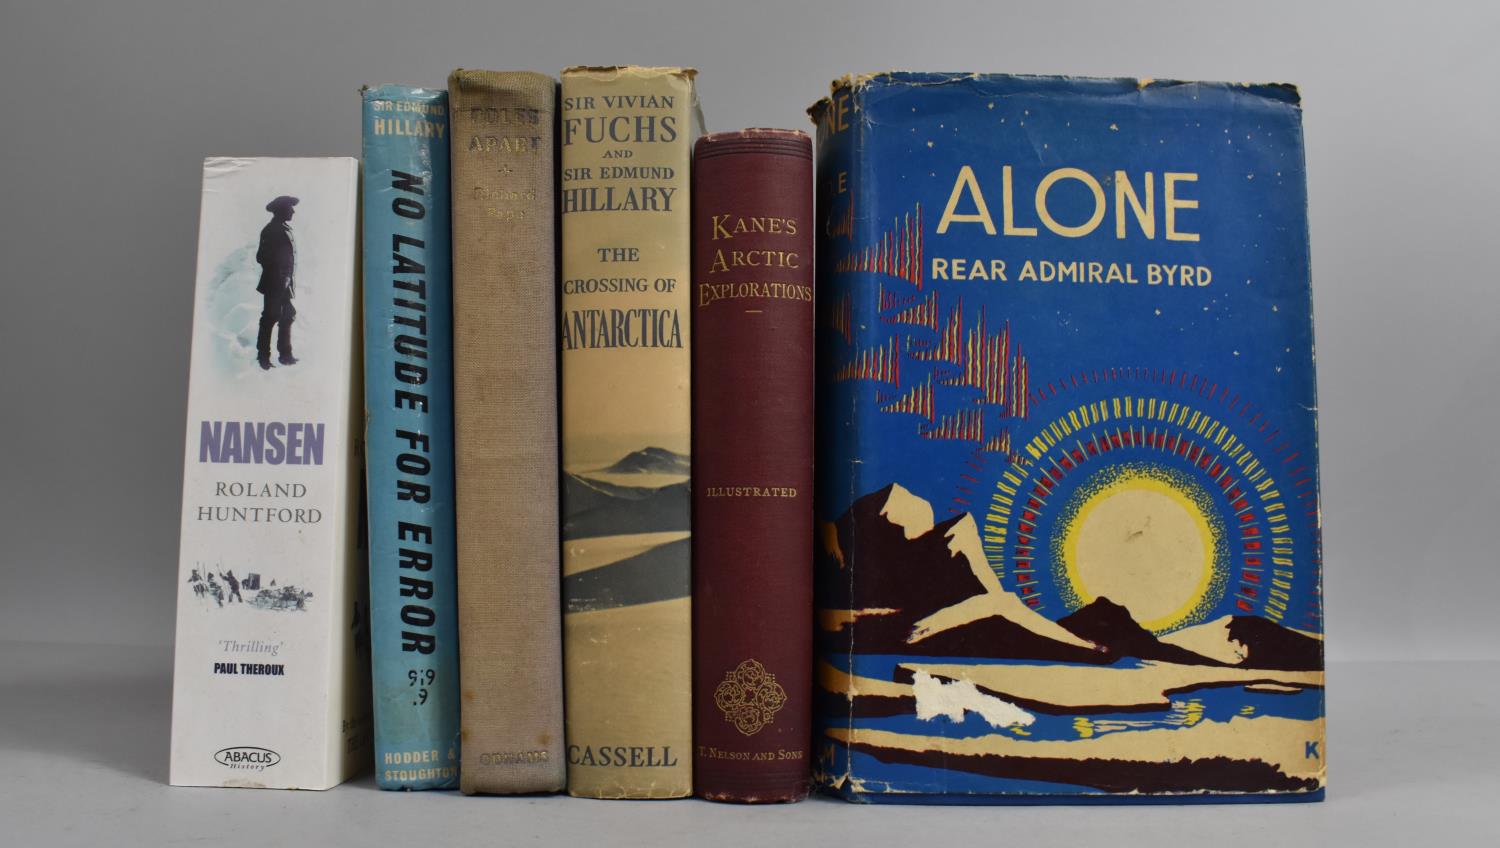 A Collection of Various Books on the Topic of Antarctic Exploration to include Alone by Richard